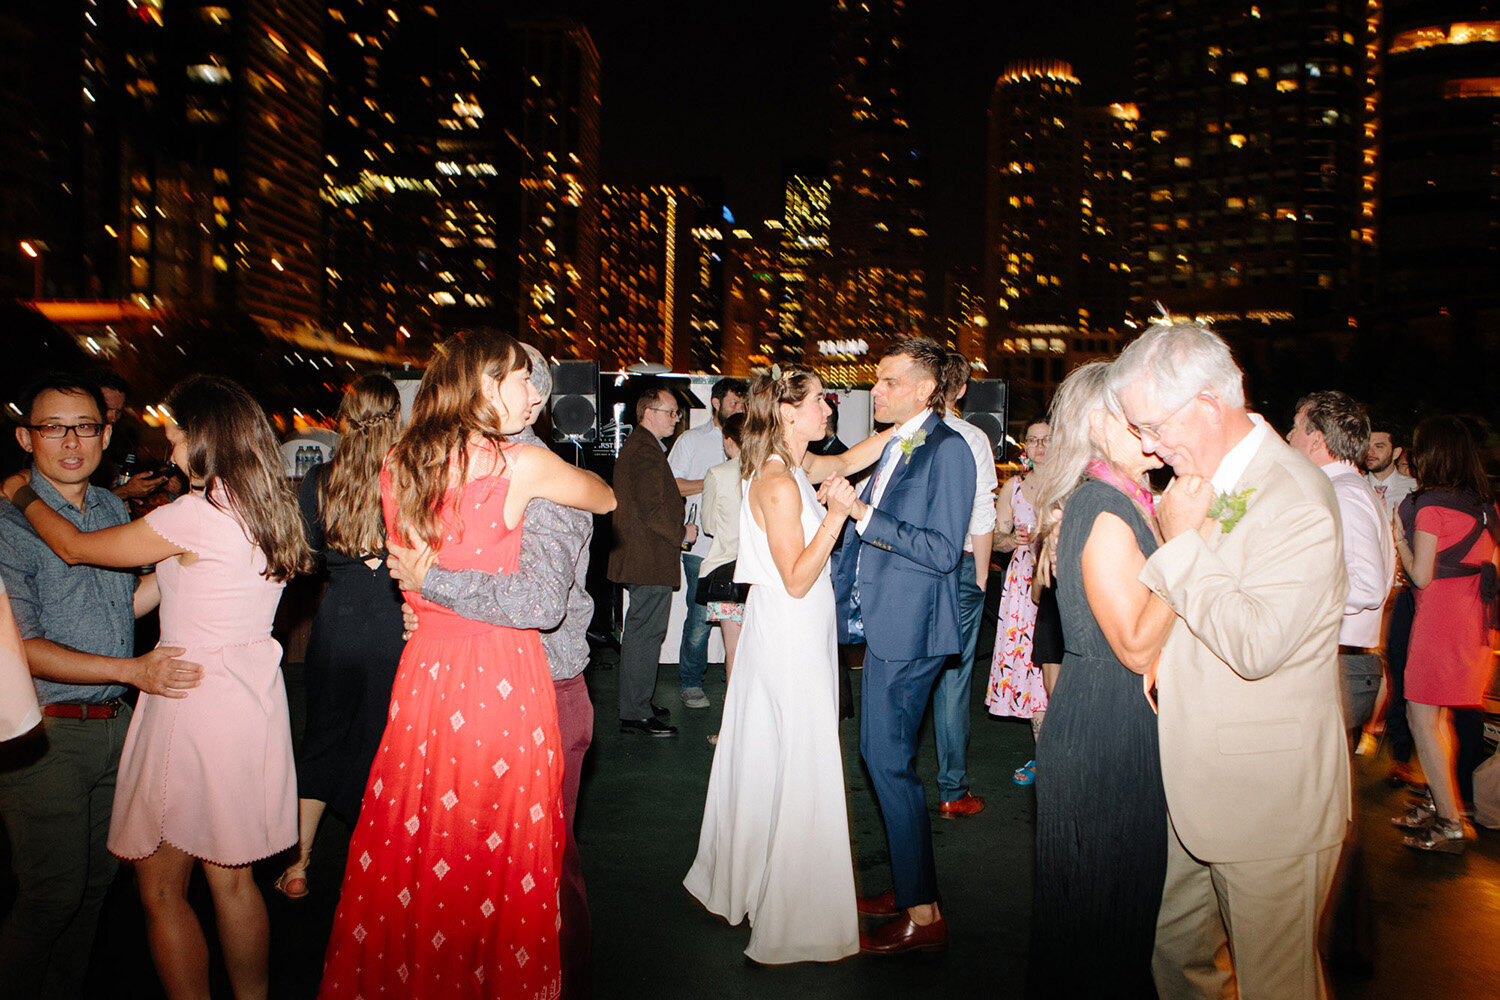 dancing-on-boat-in-downtown-chicago.jpg